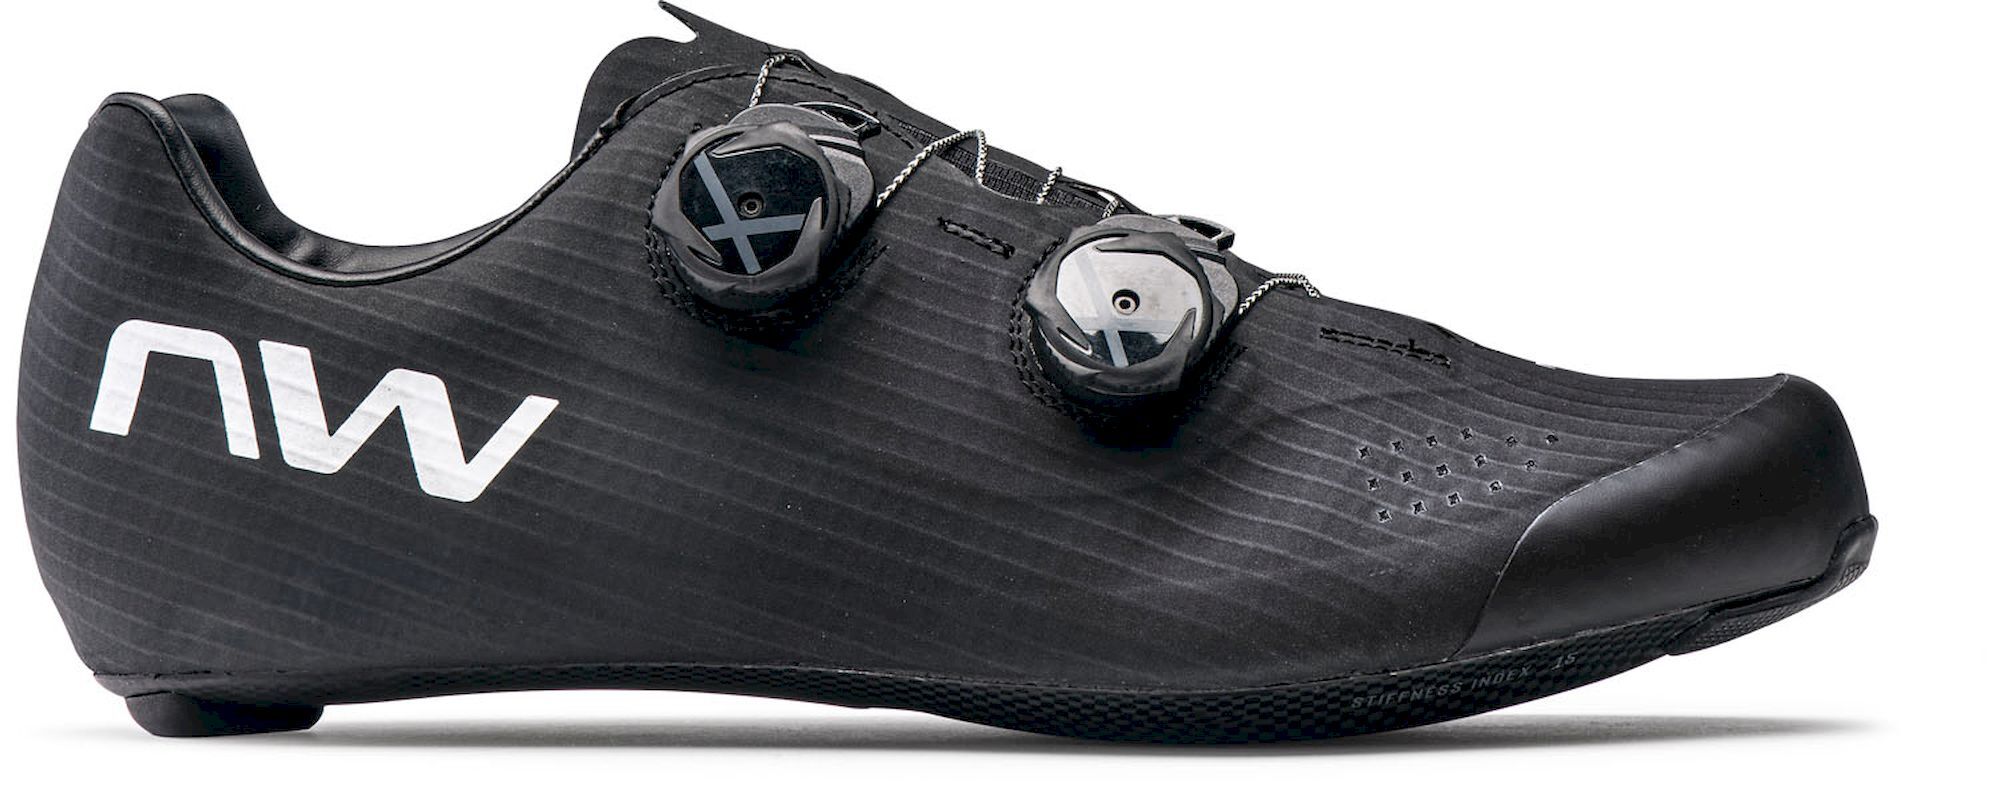 Northwave Extreme Pro 3 - Cycling shoes - Men's | Hardloop